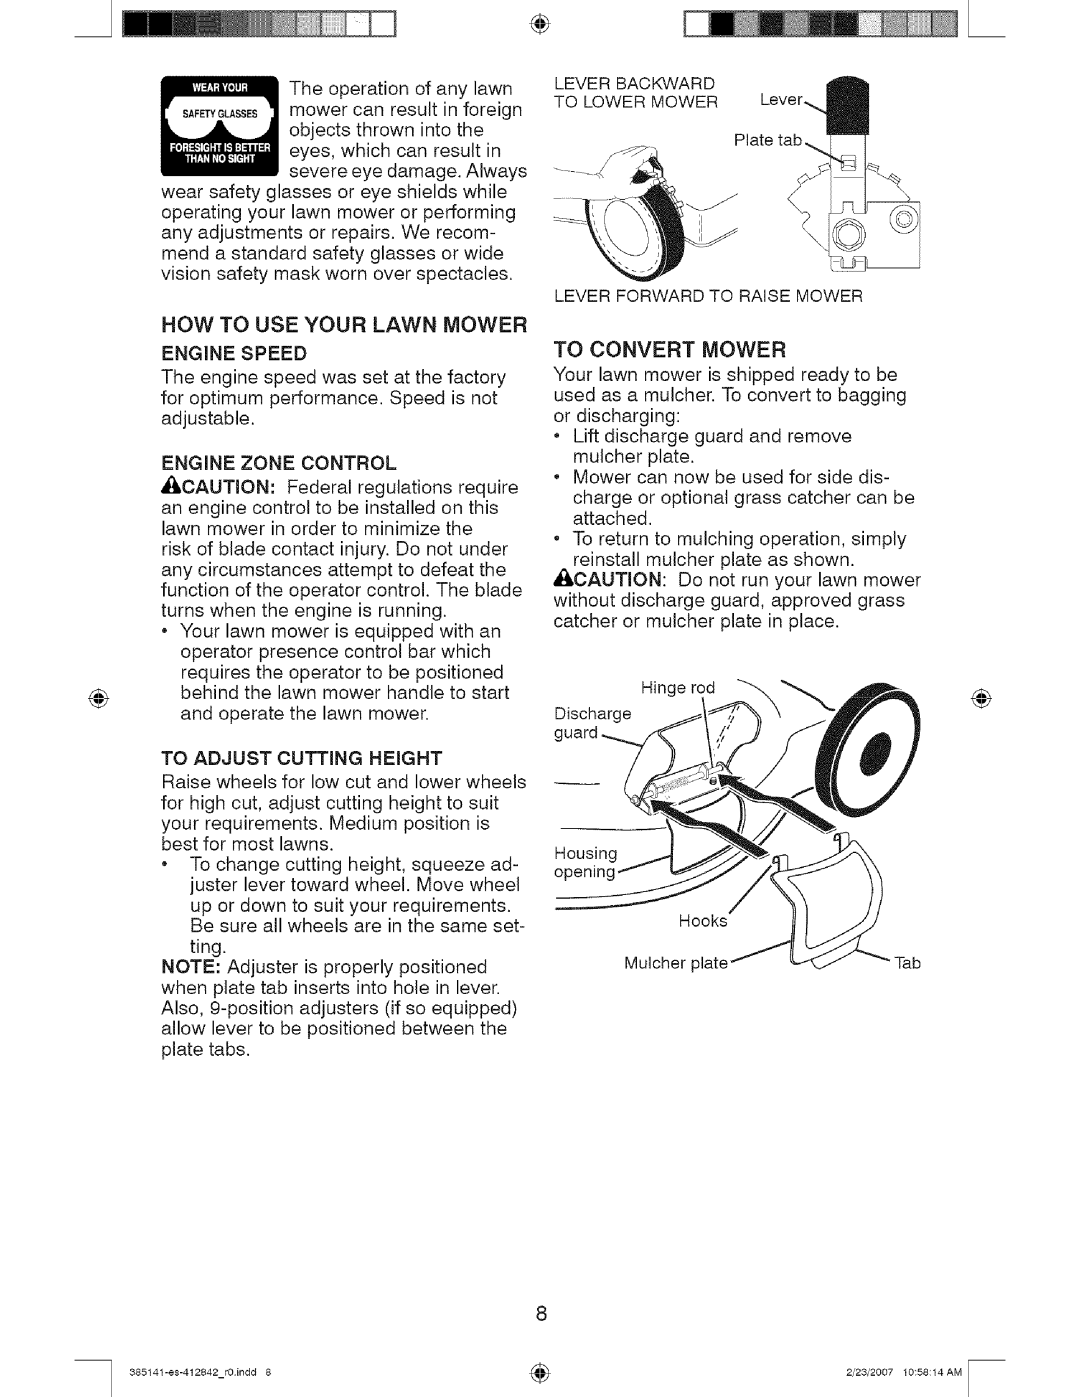 Craftsman 917, 385141 manual How To Use Your Lawn Mower, To Convert Mower 